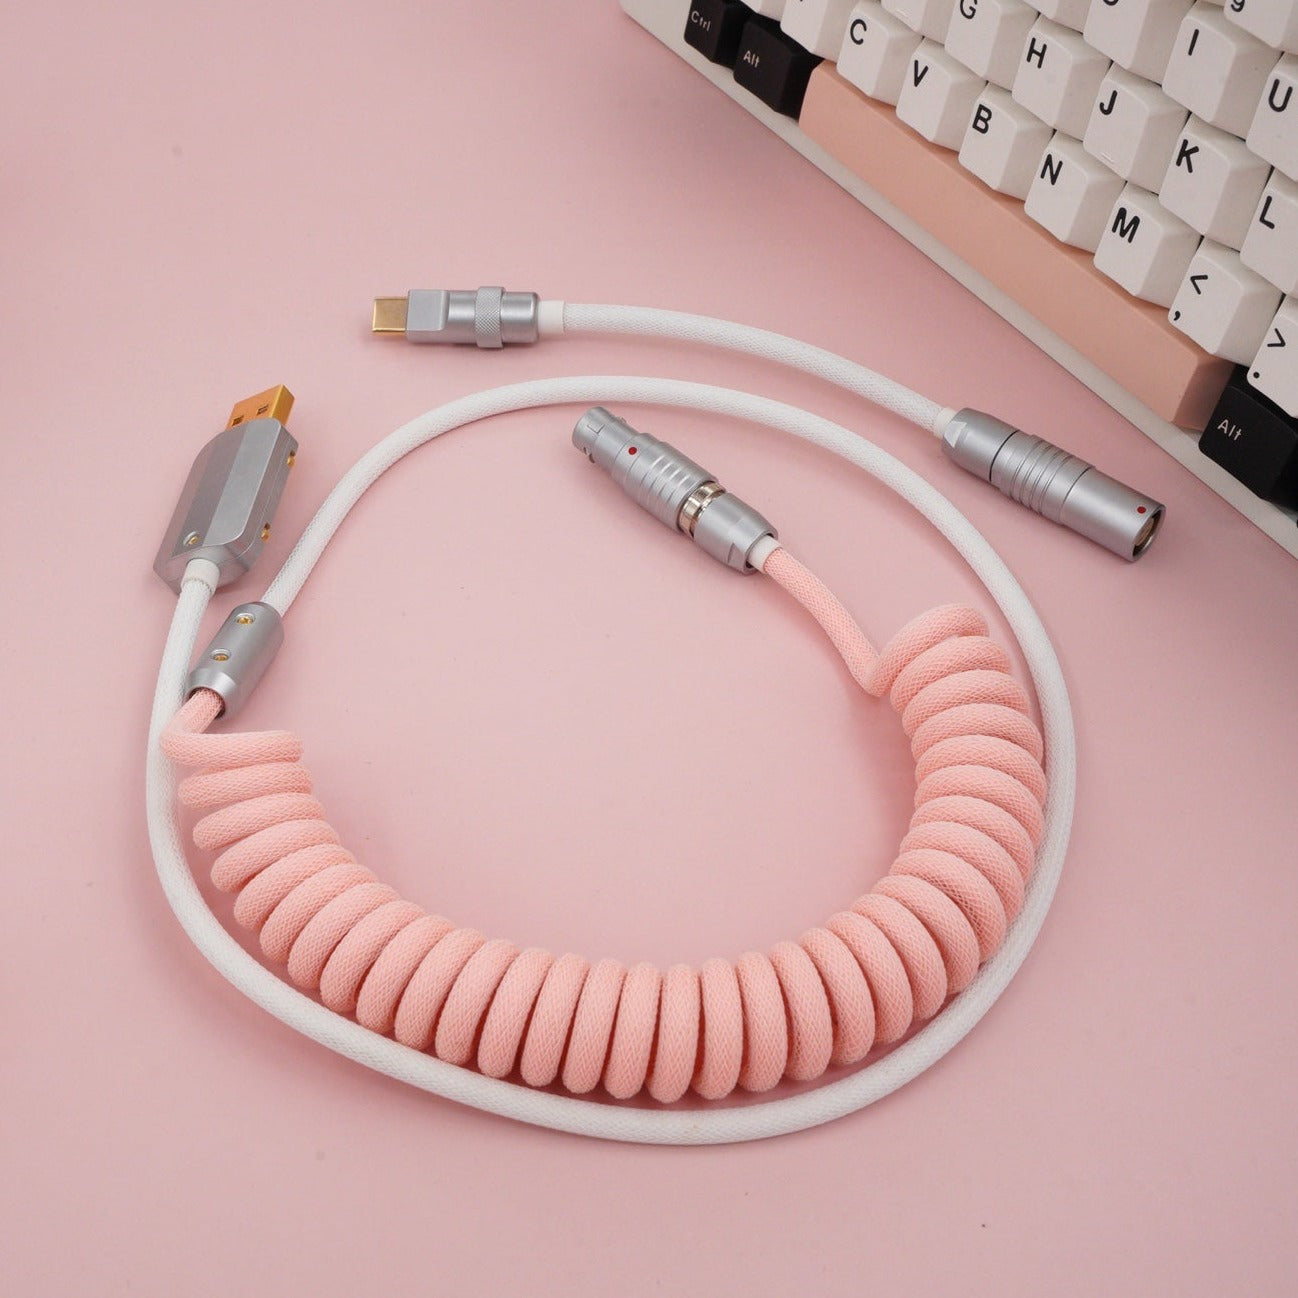 Sleeved Coiled Keyboard Aviator Cable, Lemo Style Connector - Macaron Pink/White